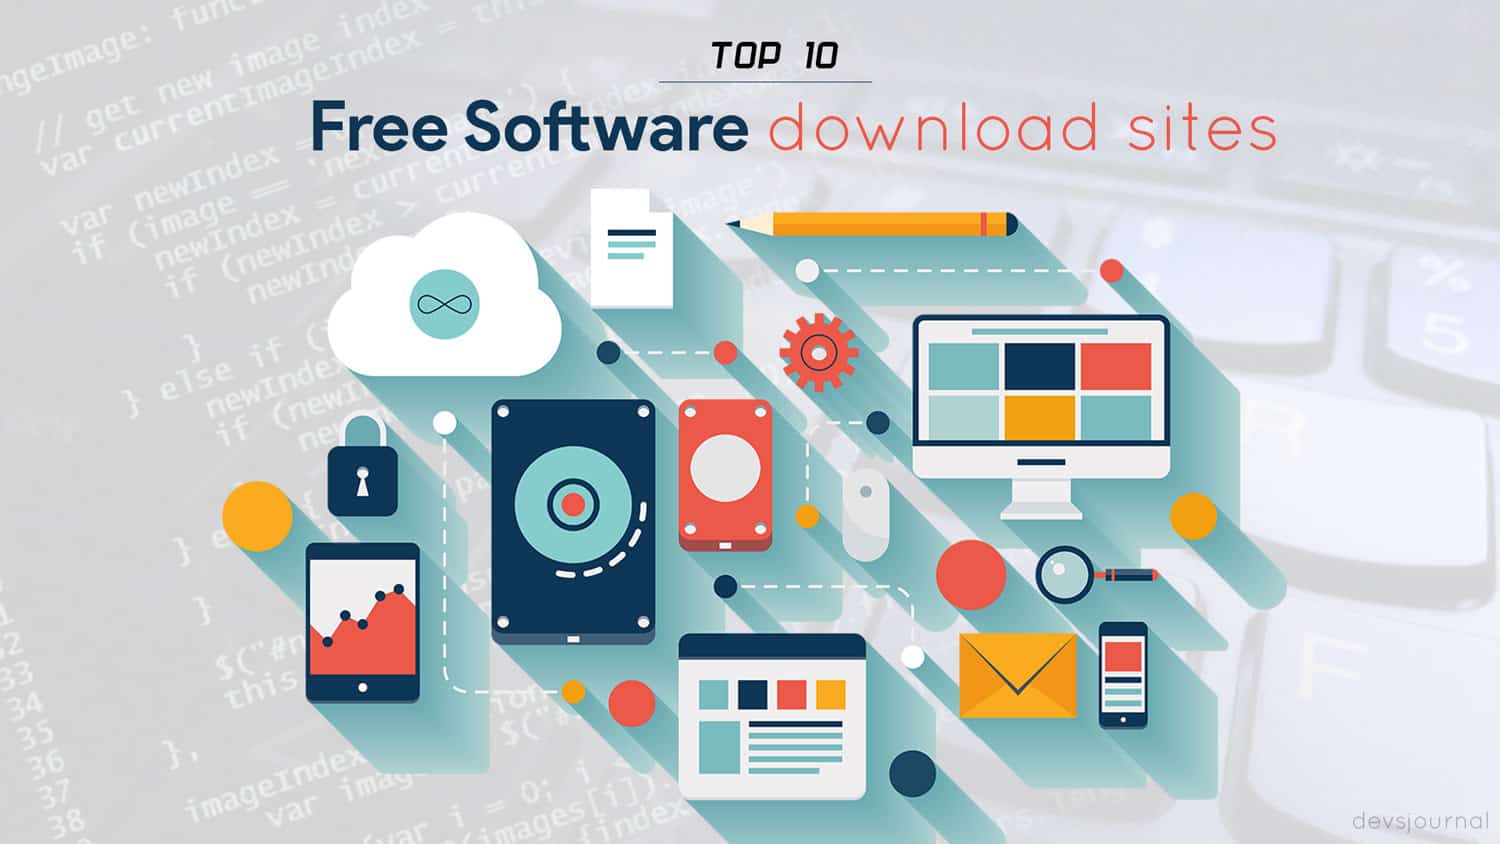 Software download sites free full version free